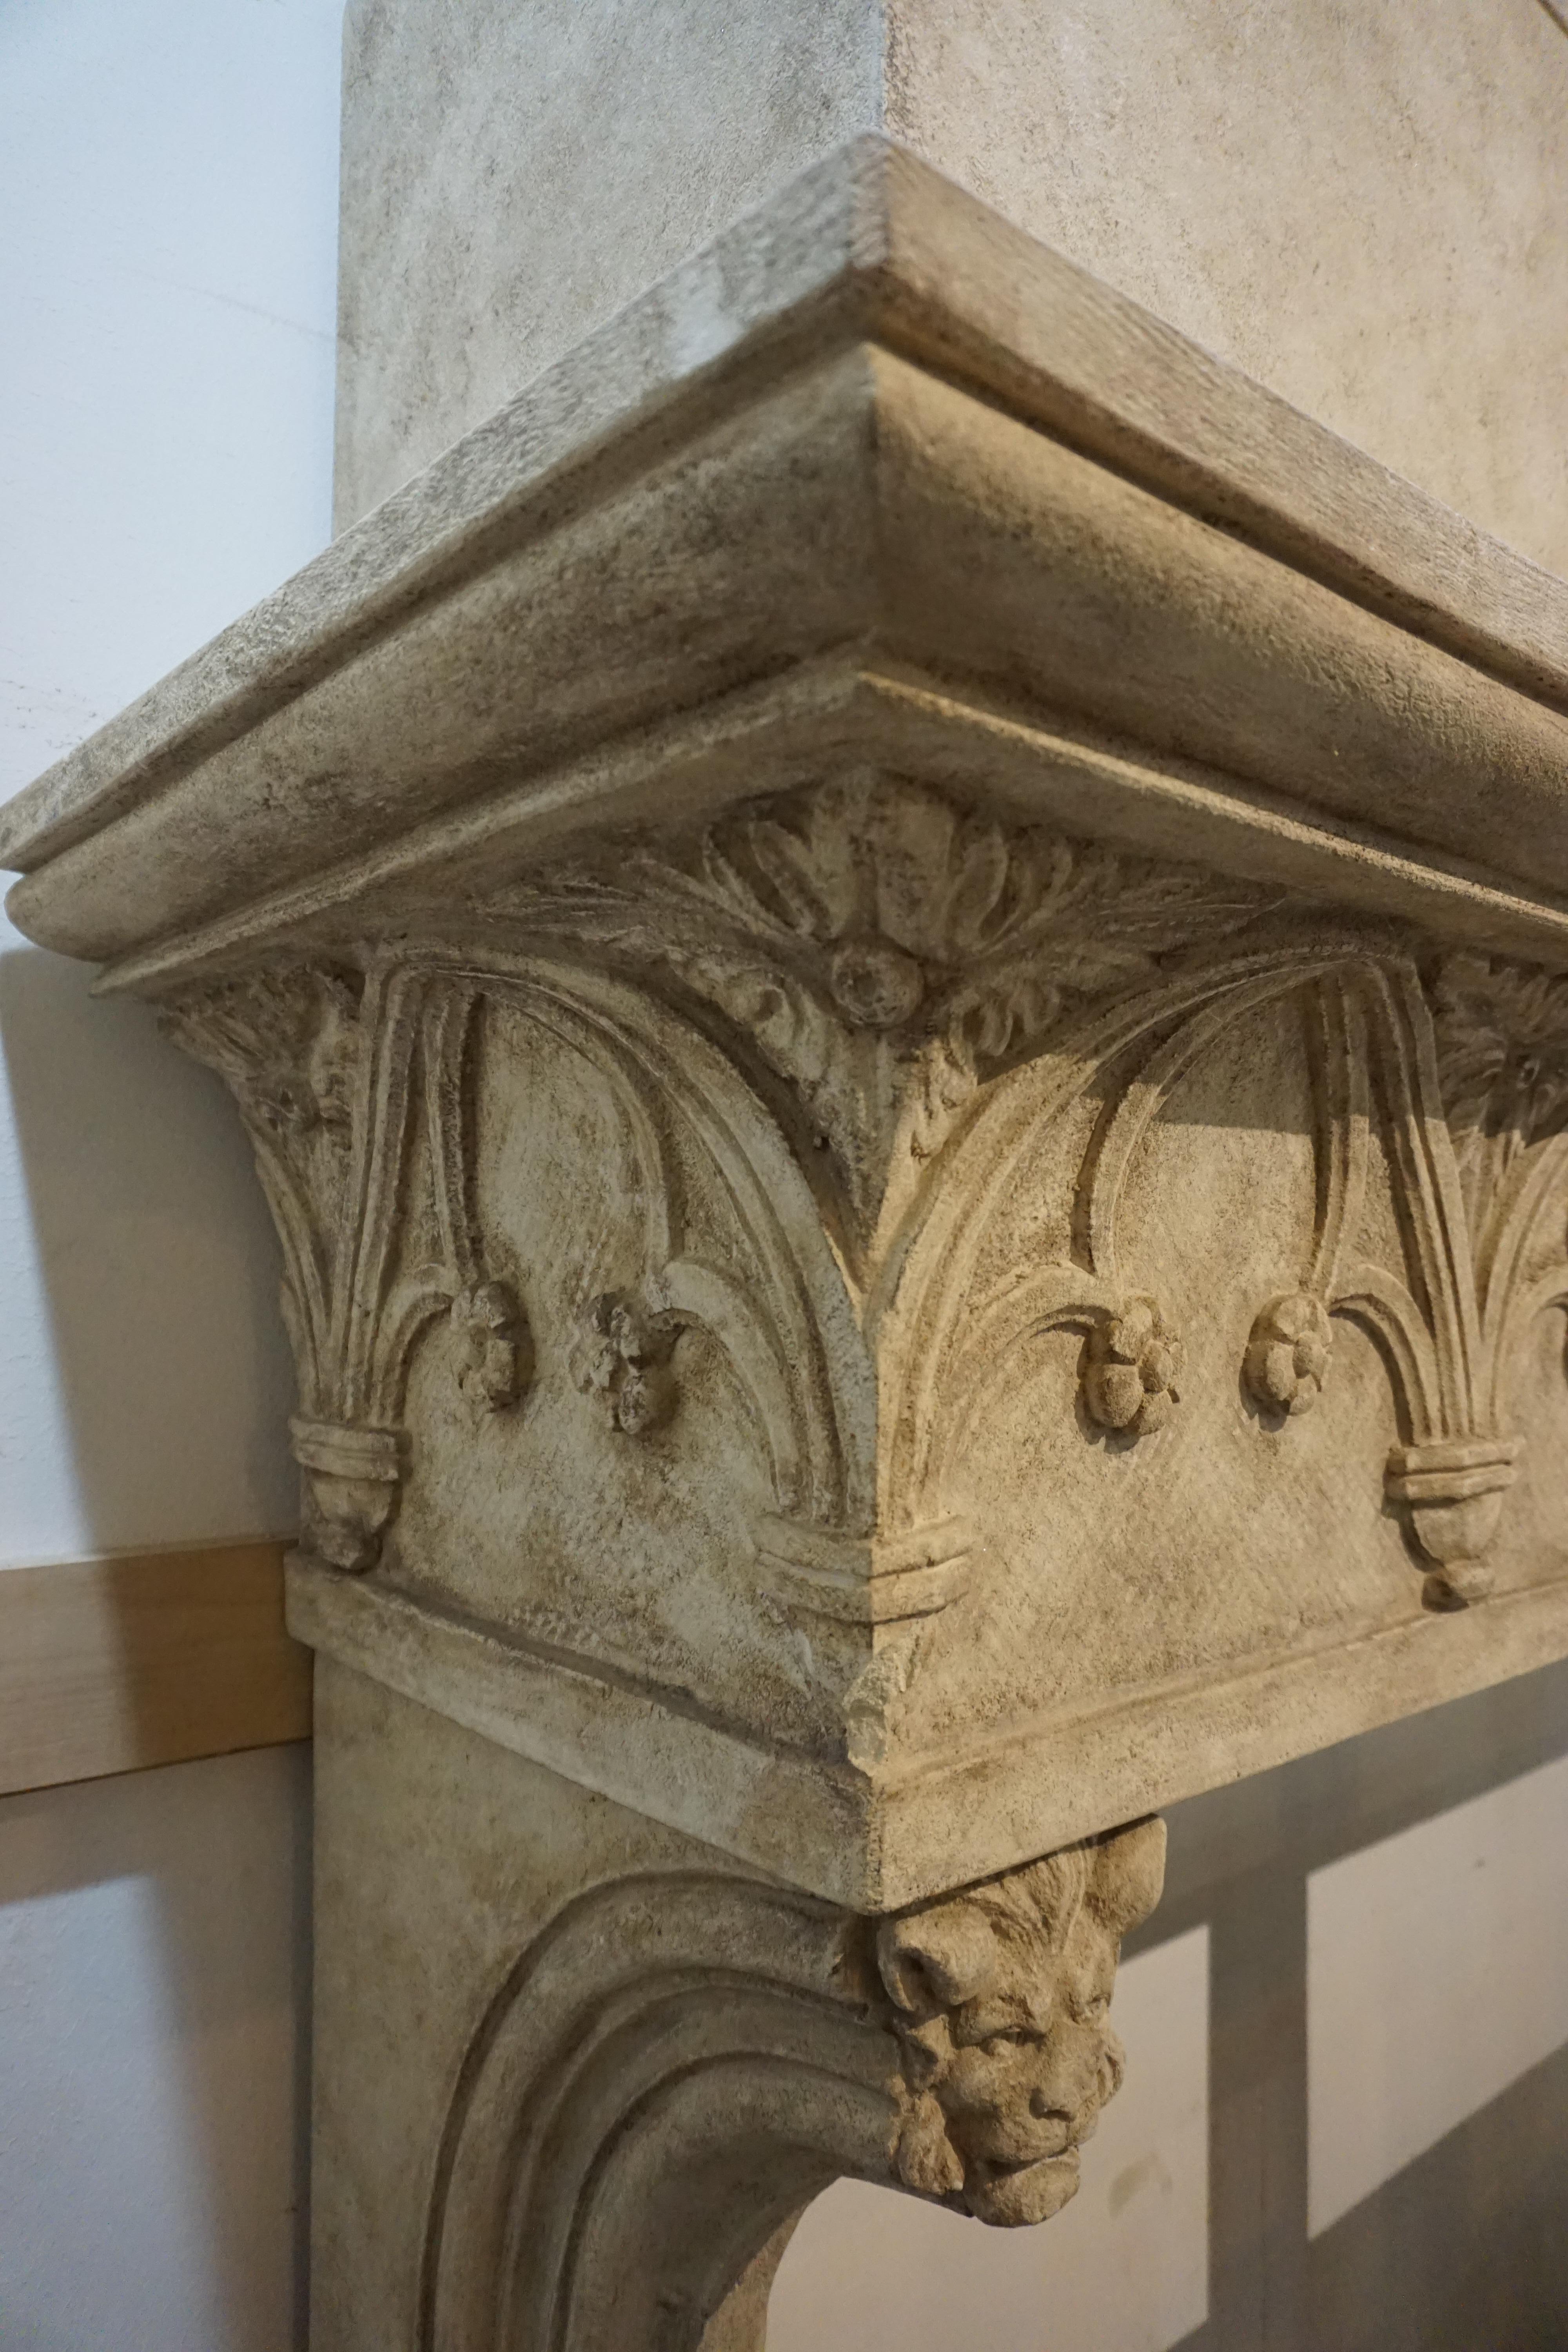 Designed and created in France, this contemporary Neo-Gothic style fireplace with hood was the perfect solution for a high-rise resident who desired the look and feel of real stone in a building with weight restrictions. Sculpted from light weight